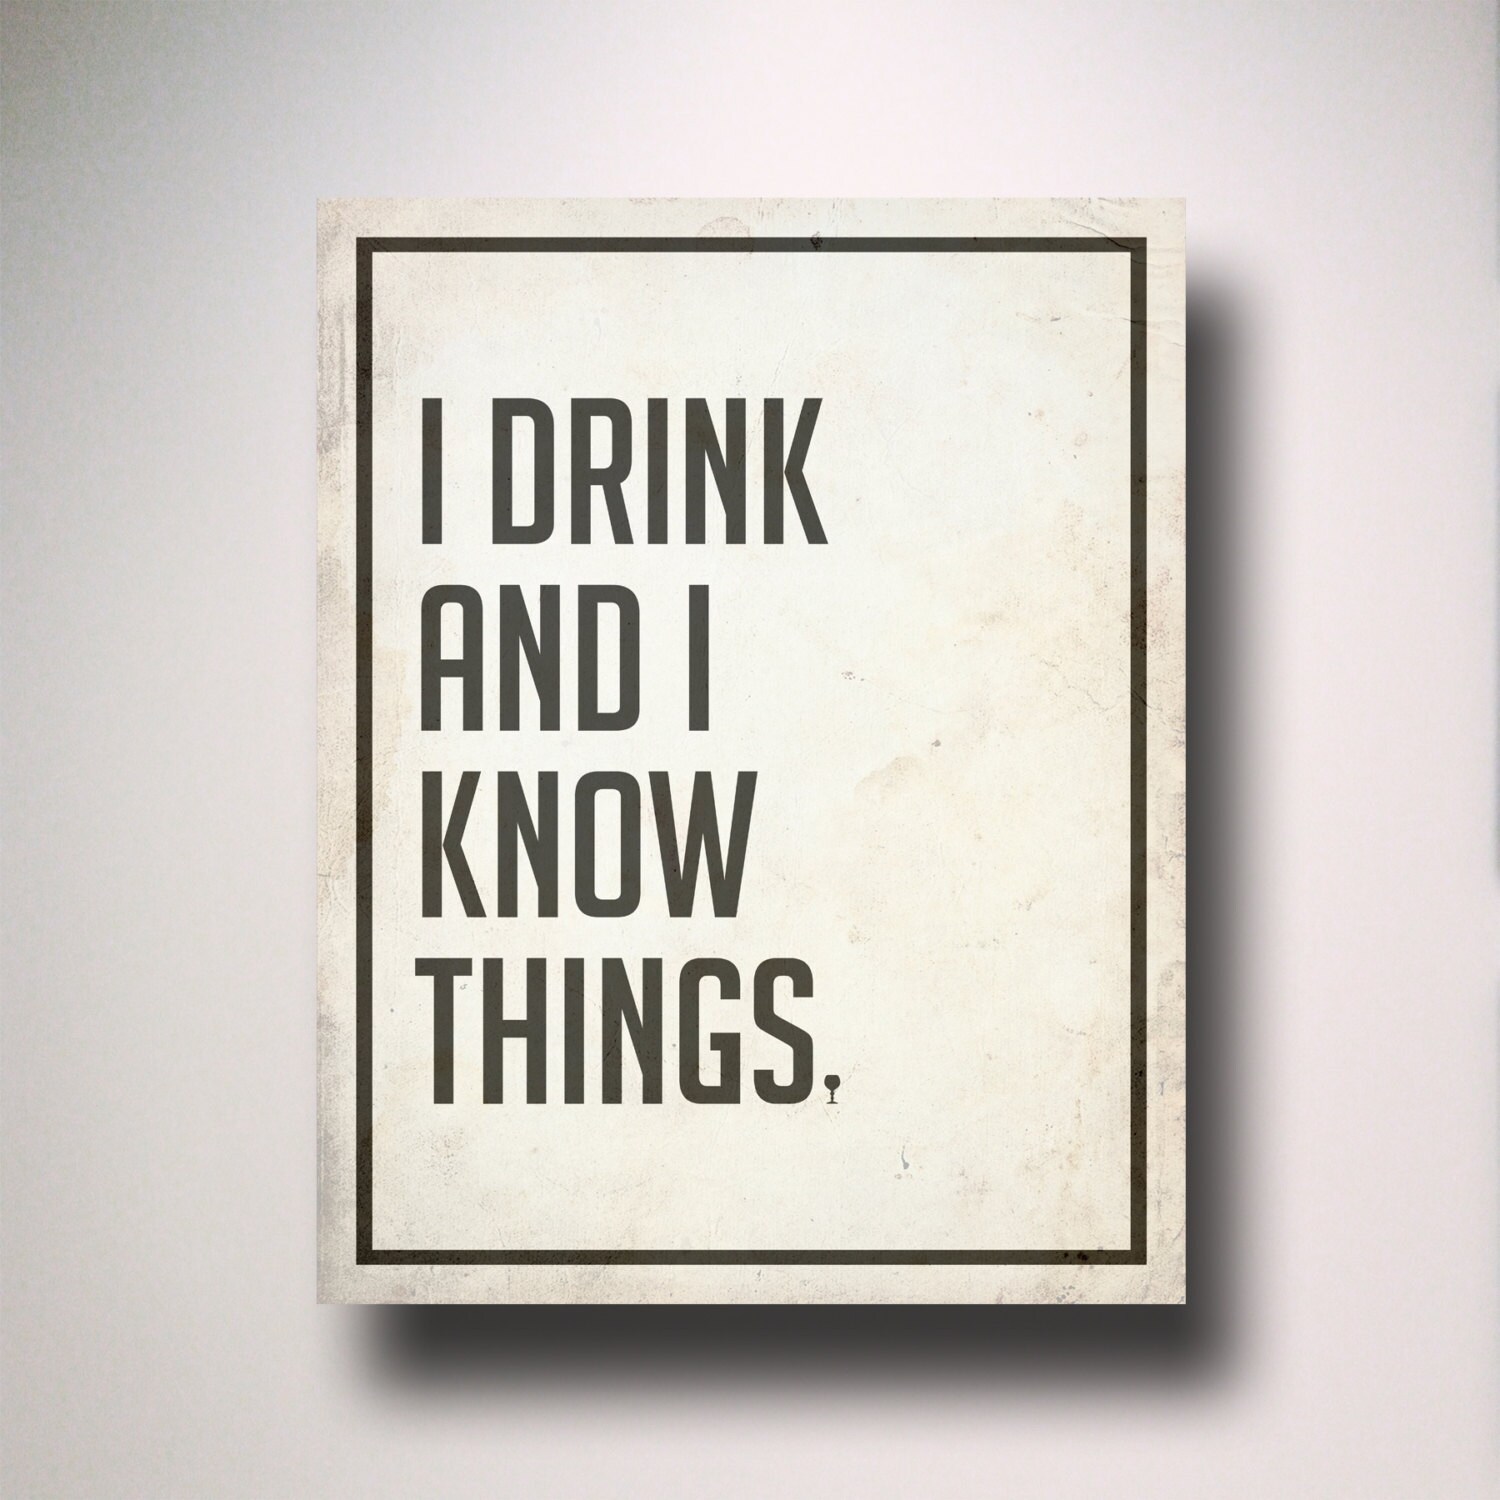 NEW PRINT ART 61X91CM GAME OF THRONES TYRION I DRINK POSTER 